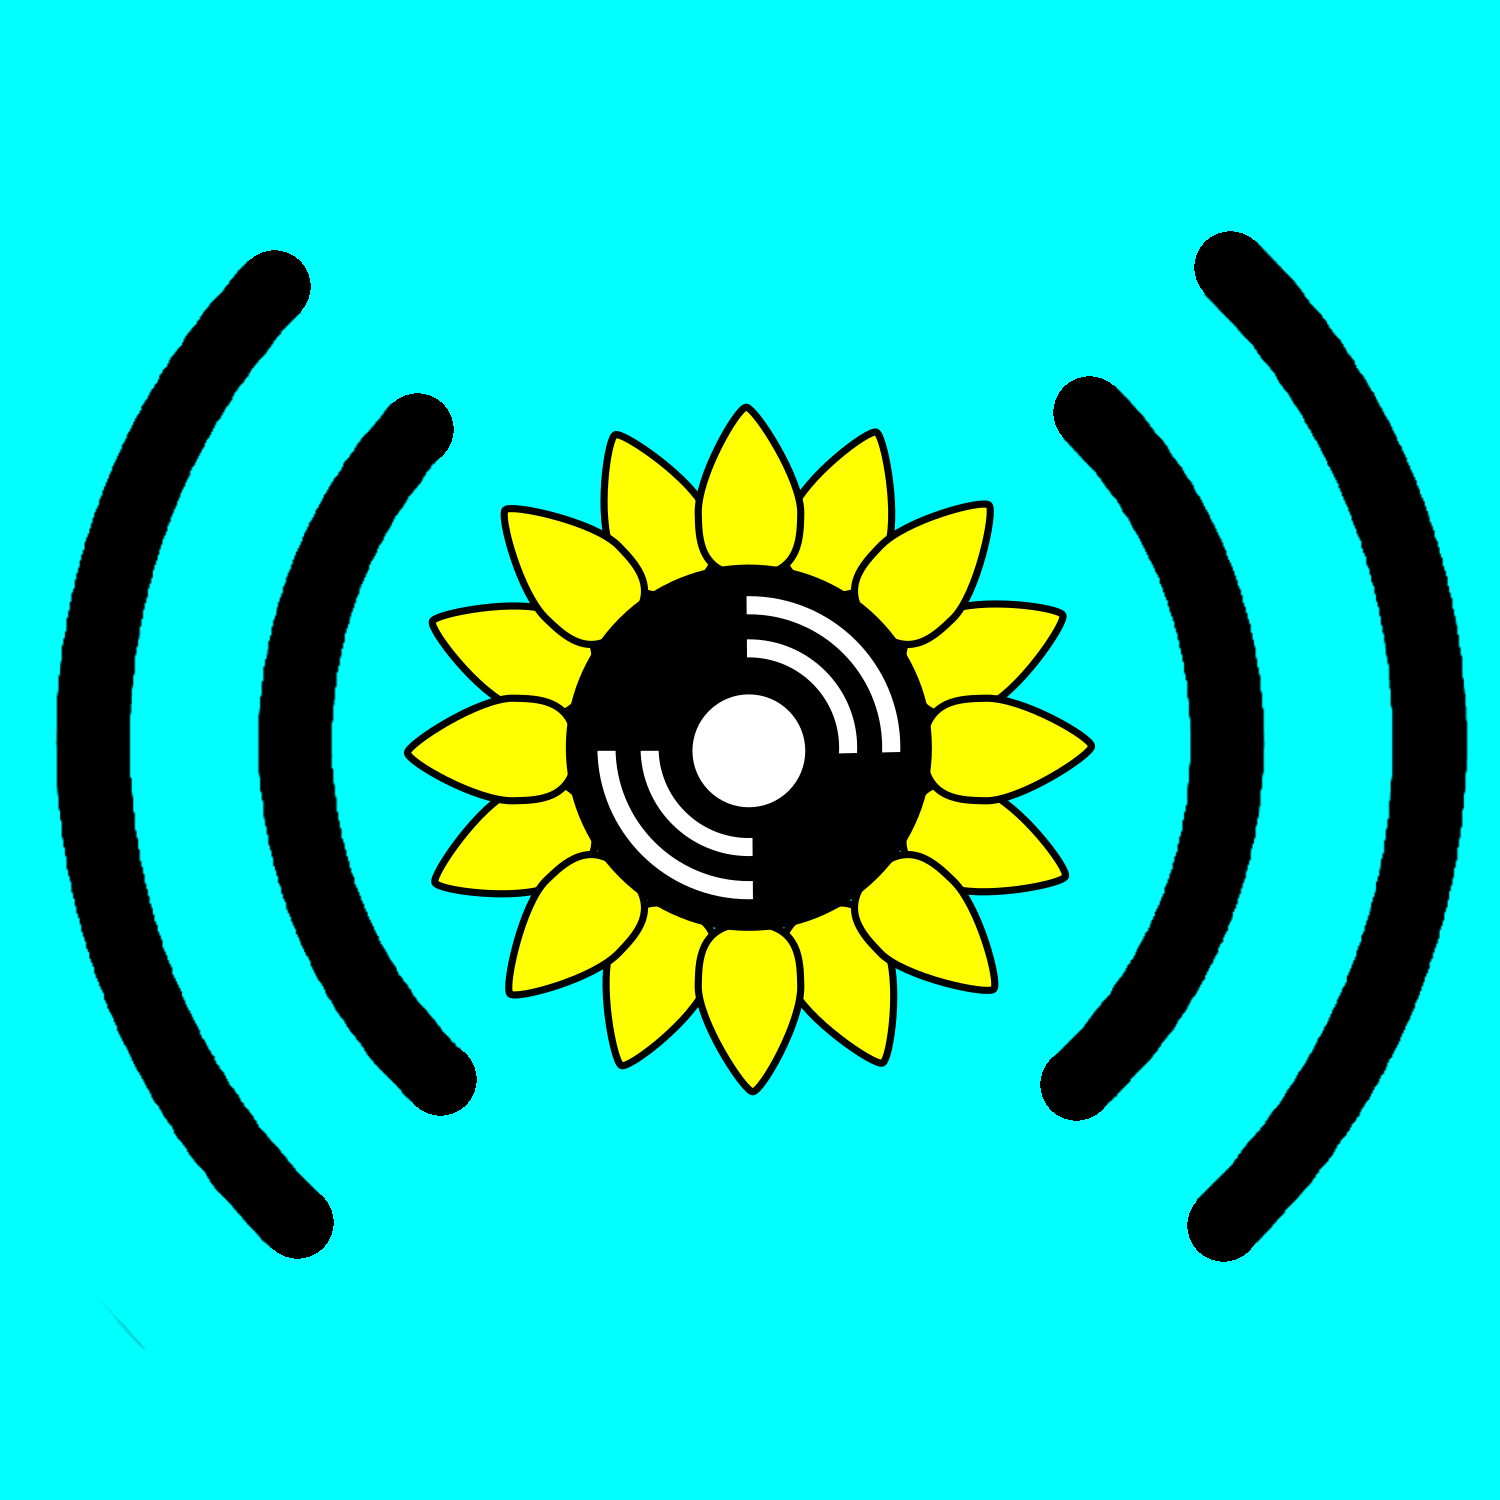 CKMS Podcats logo